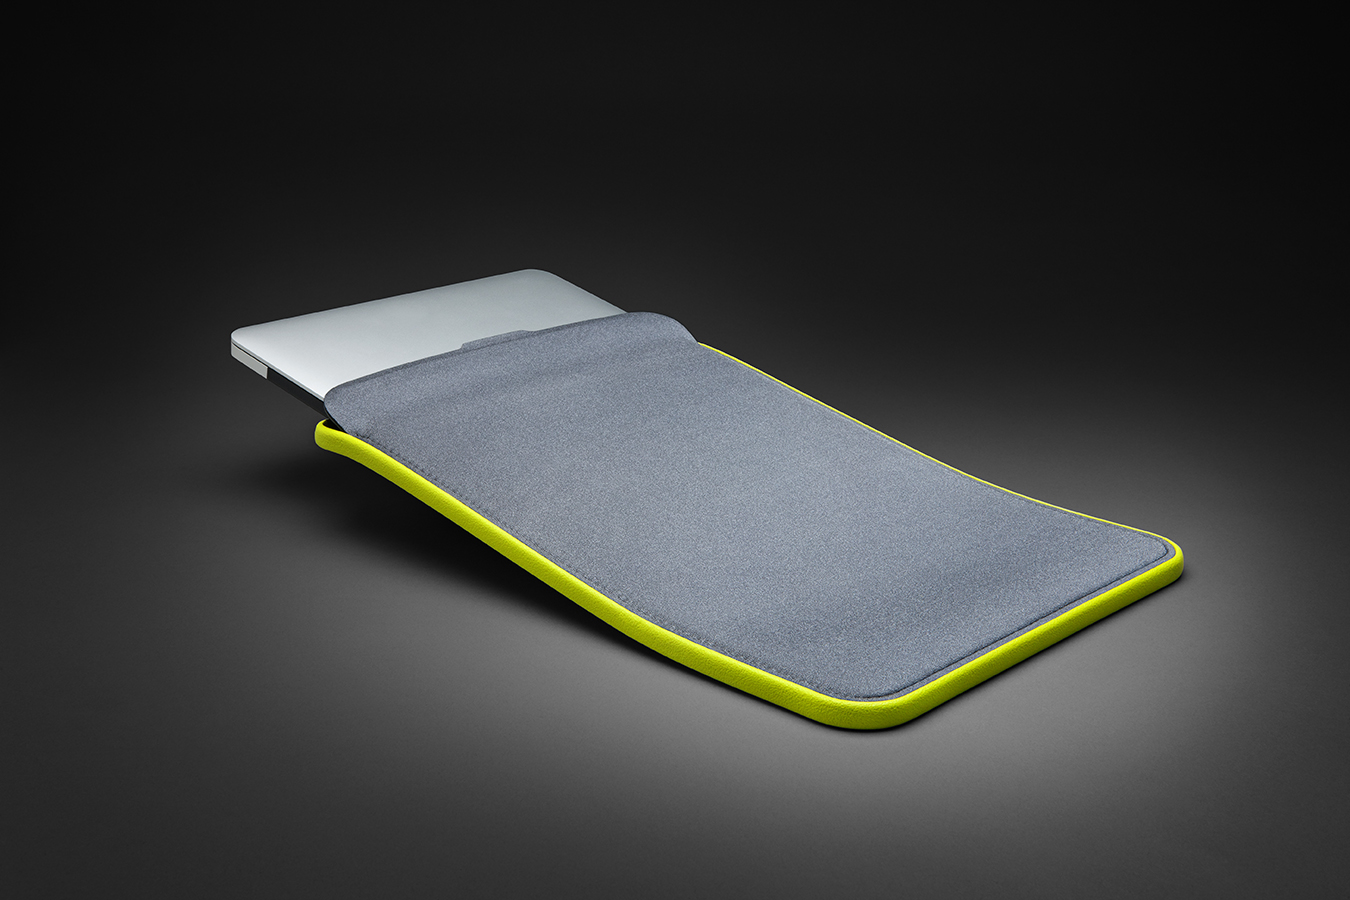 incase-launches-icon-sleeve-with-new-protection-technology-05